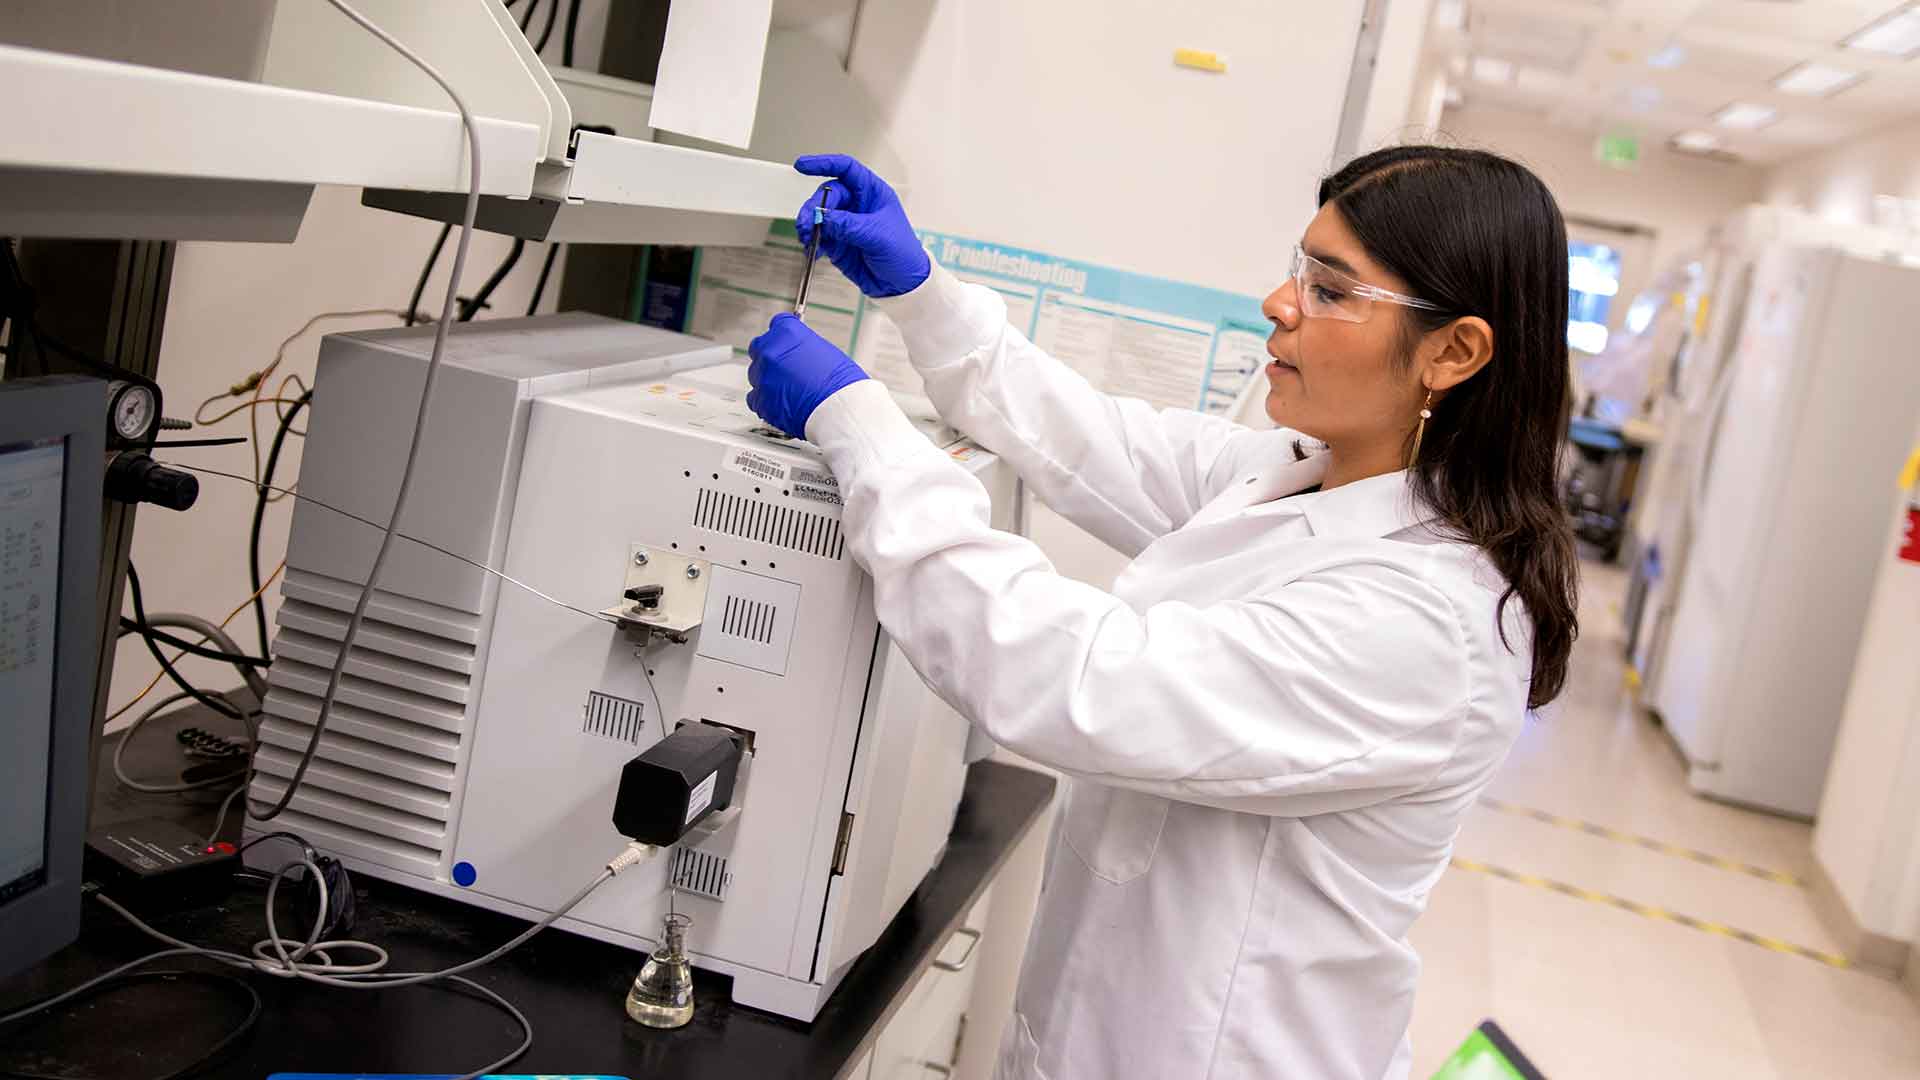 Aide Robles working in a lab